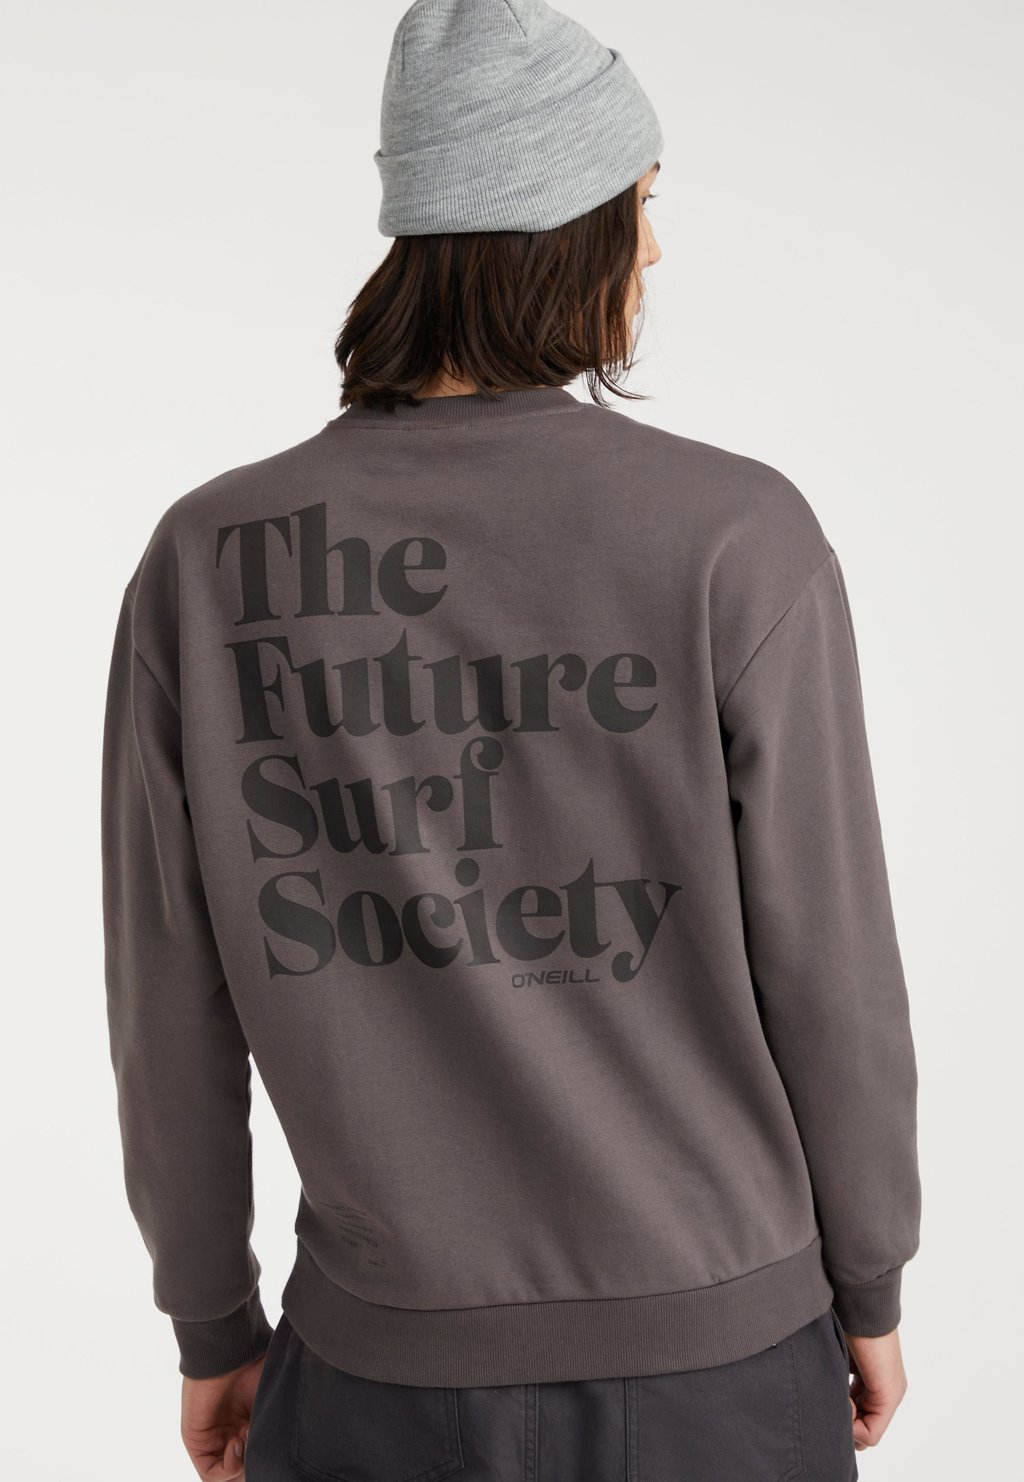 rabe tish fine feathered friends Толстовка Future Surf Society O'Neill, цвет rabe